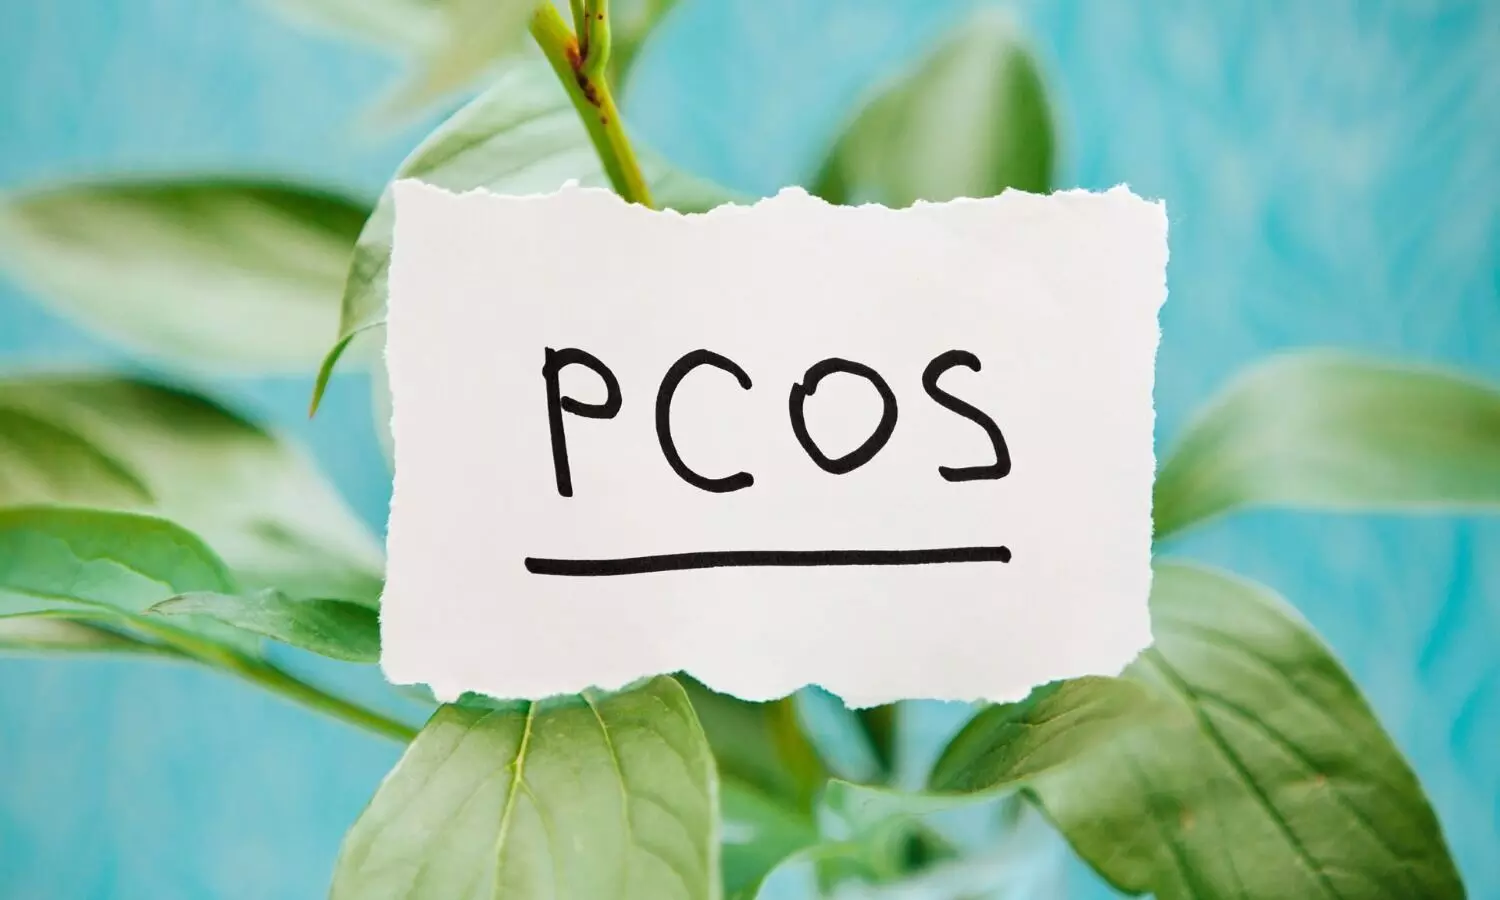 Can oral contraceptives improve Taste function in women with PCOS?